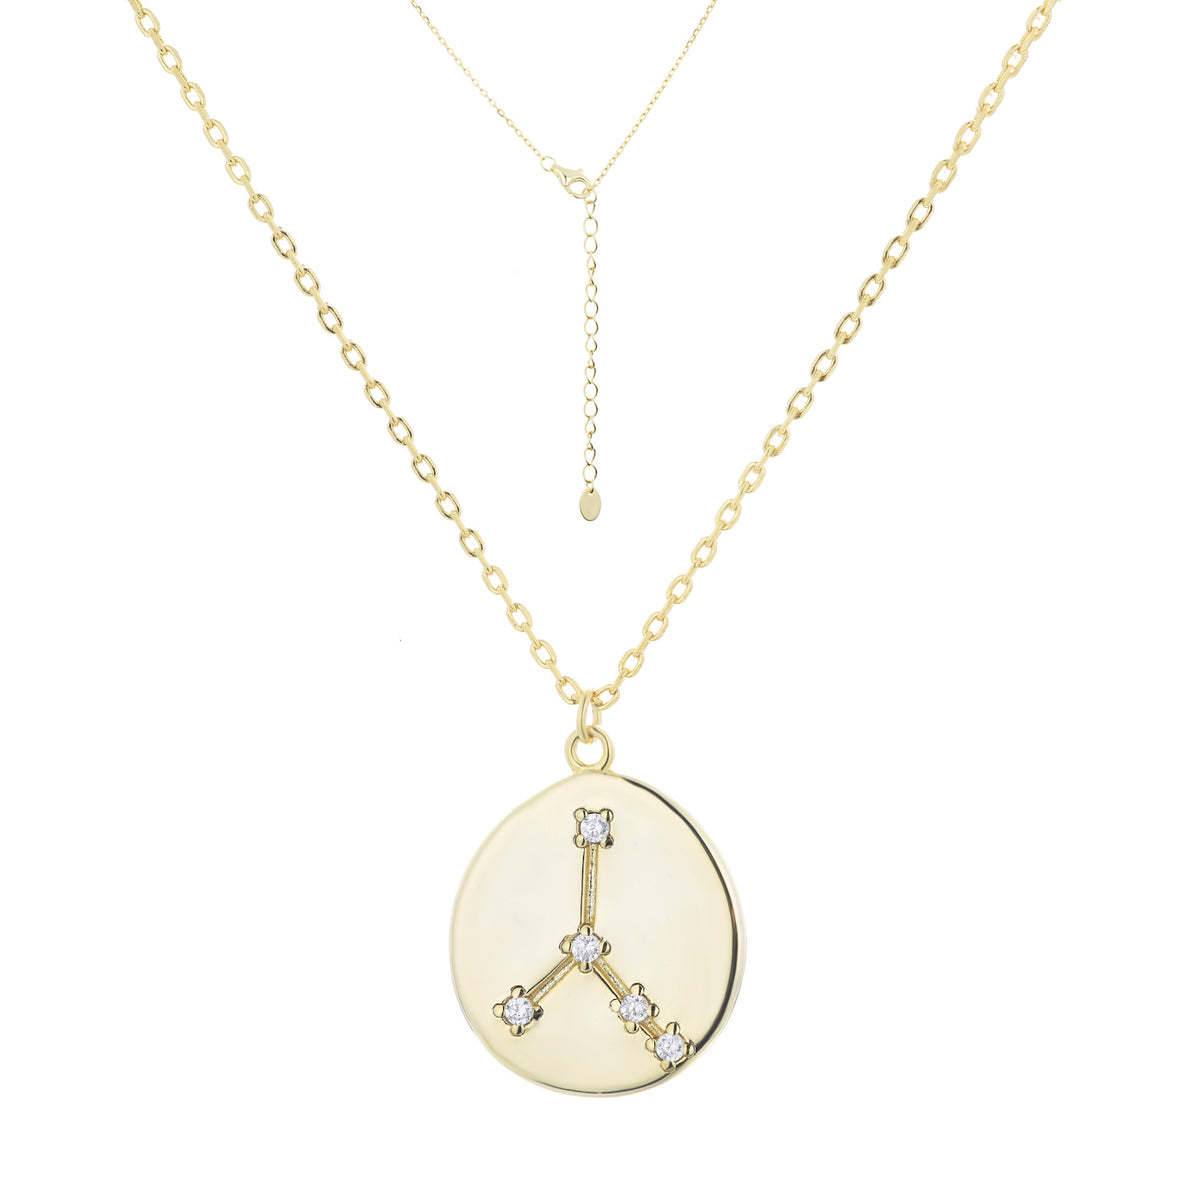 CANCER - ΚΑΡΚΙΝΟΣ Pendant | White CZ | 18K Gold Plated 925 Silver